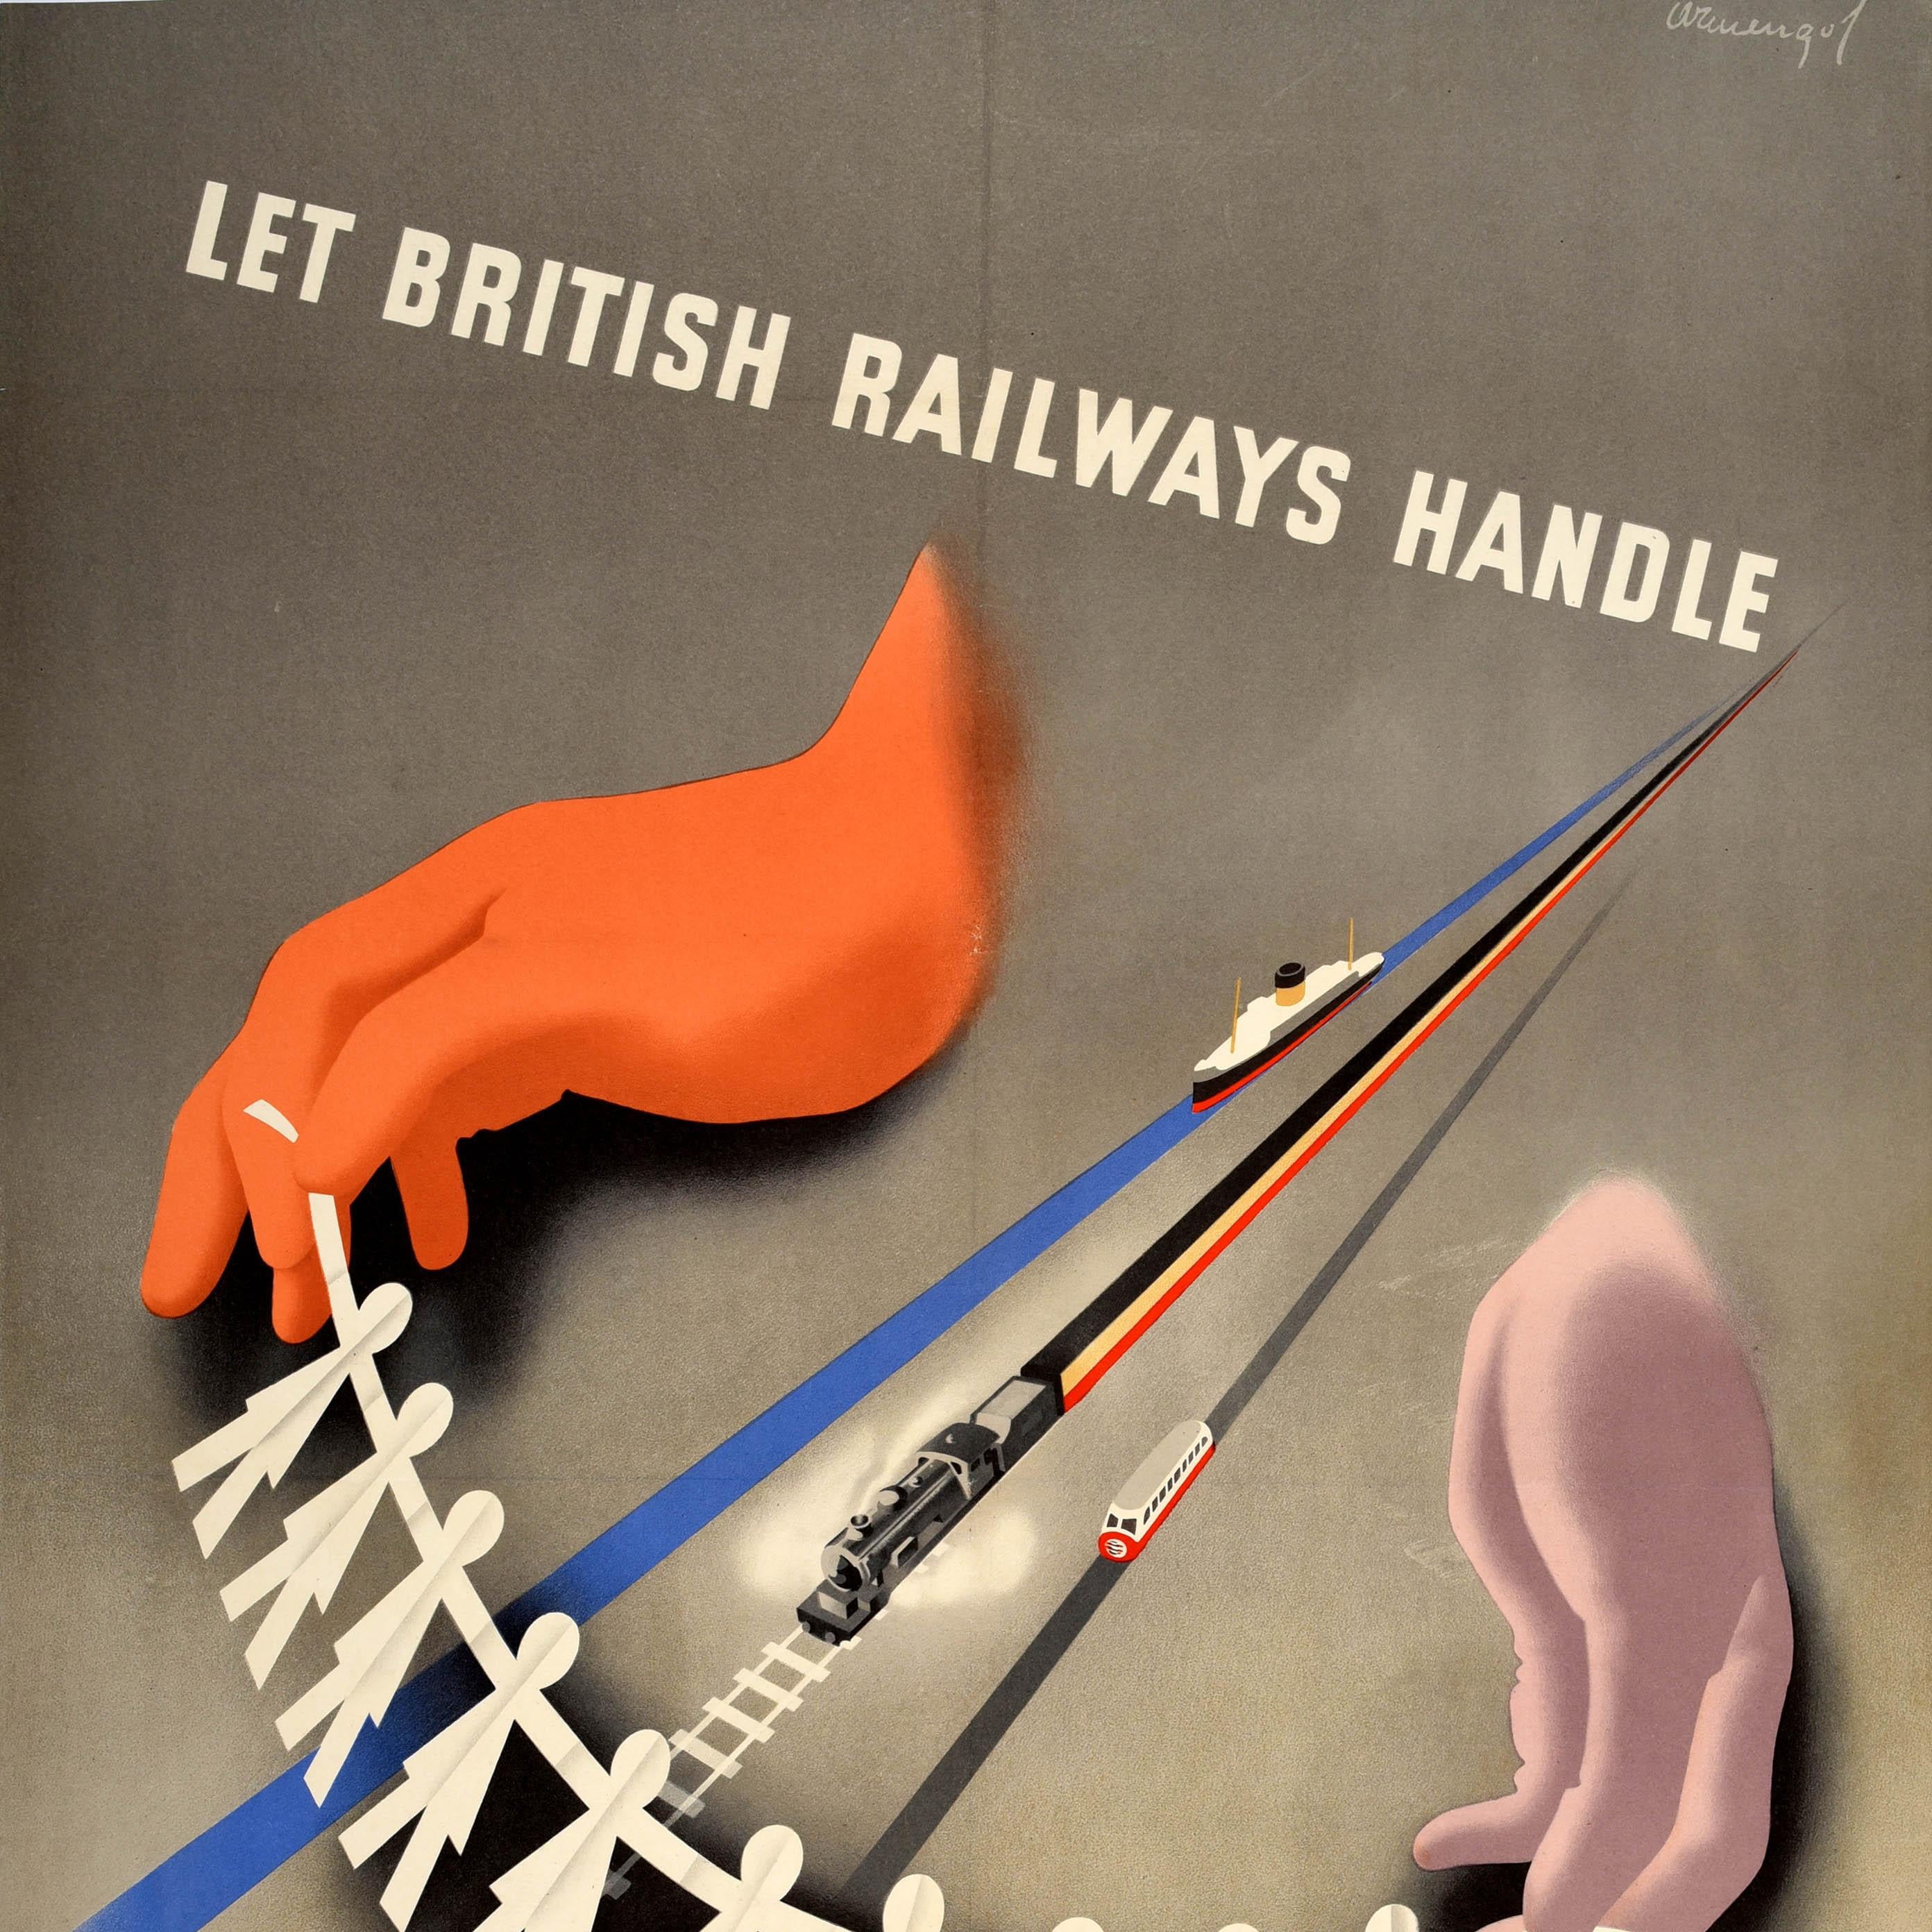 Original Vintage Travel Advertising Poster British Railways Handle Party Outing  In Good Condition For Sale In London, GB